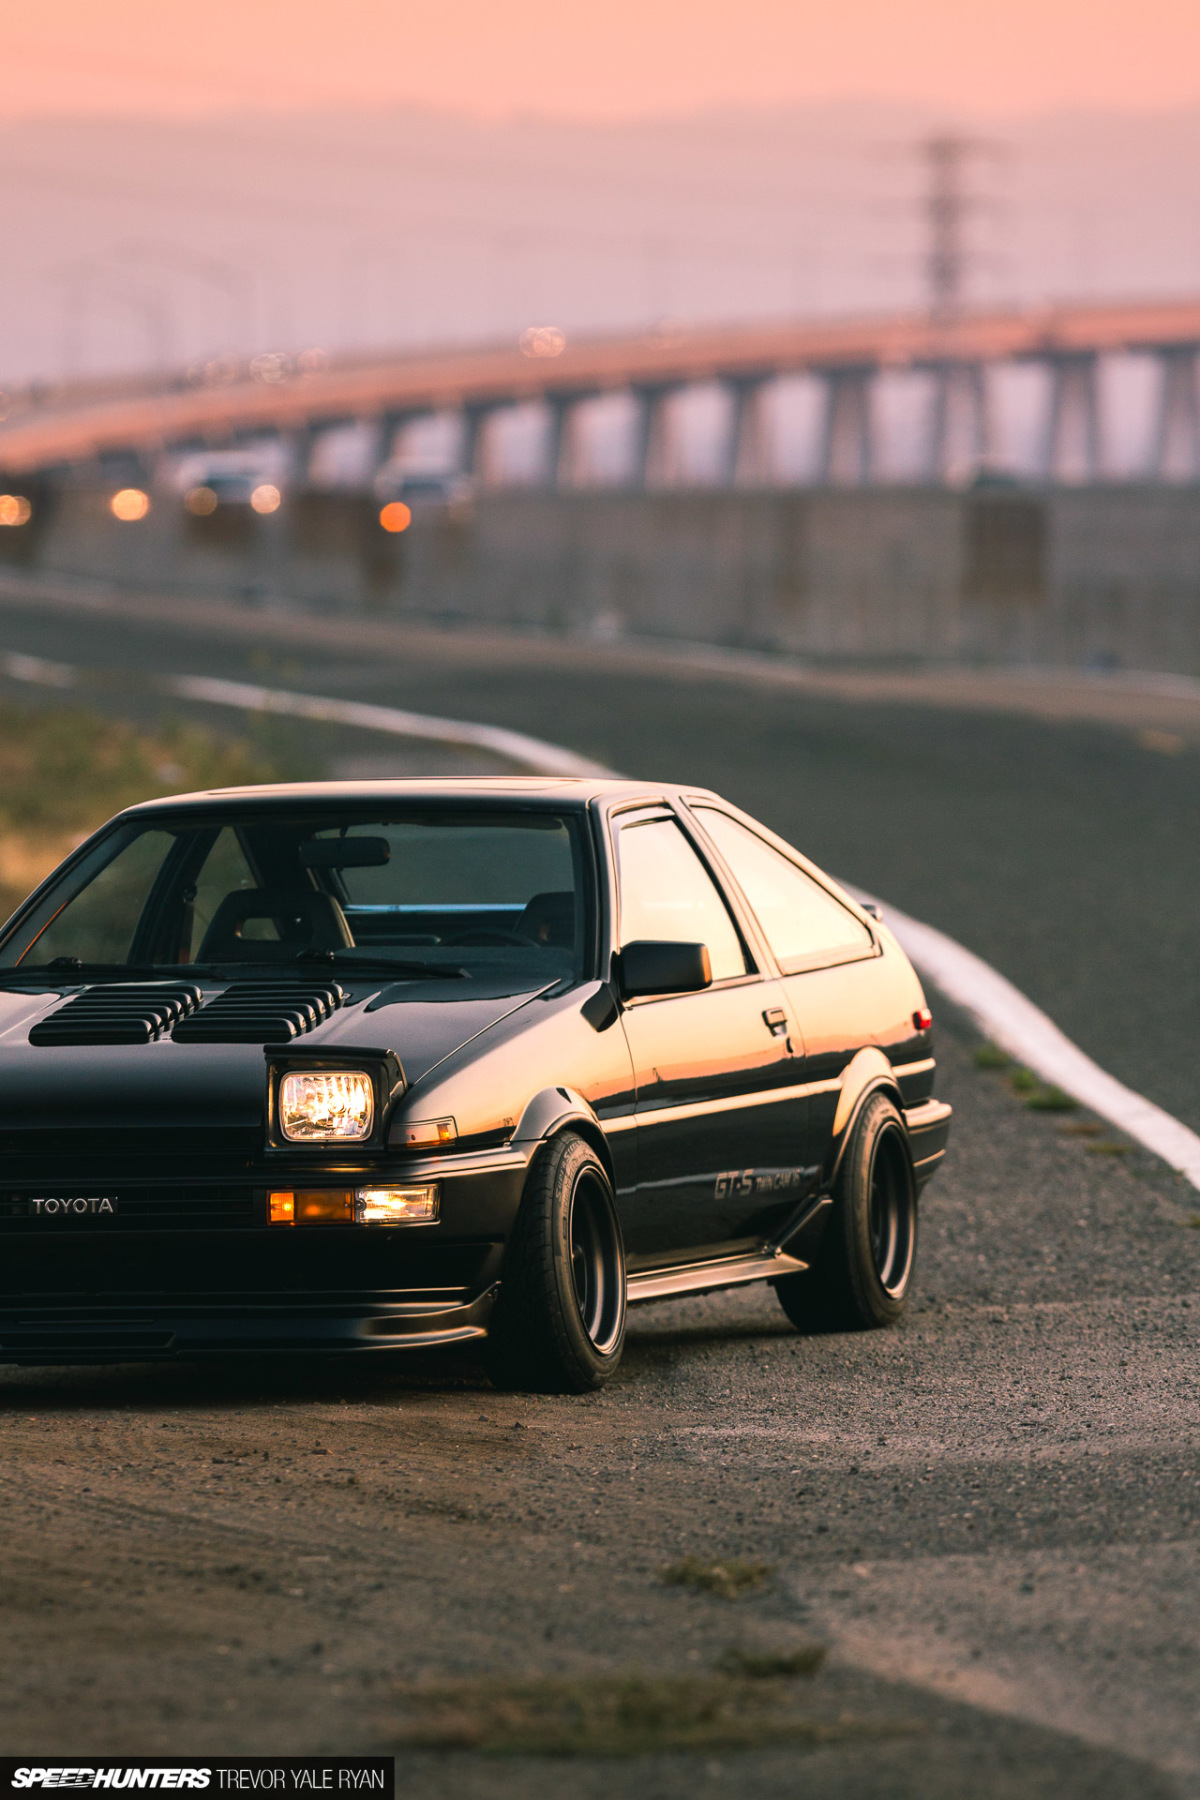 Ae86 Iphone Wallpapers